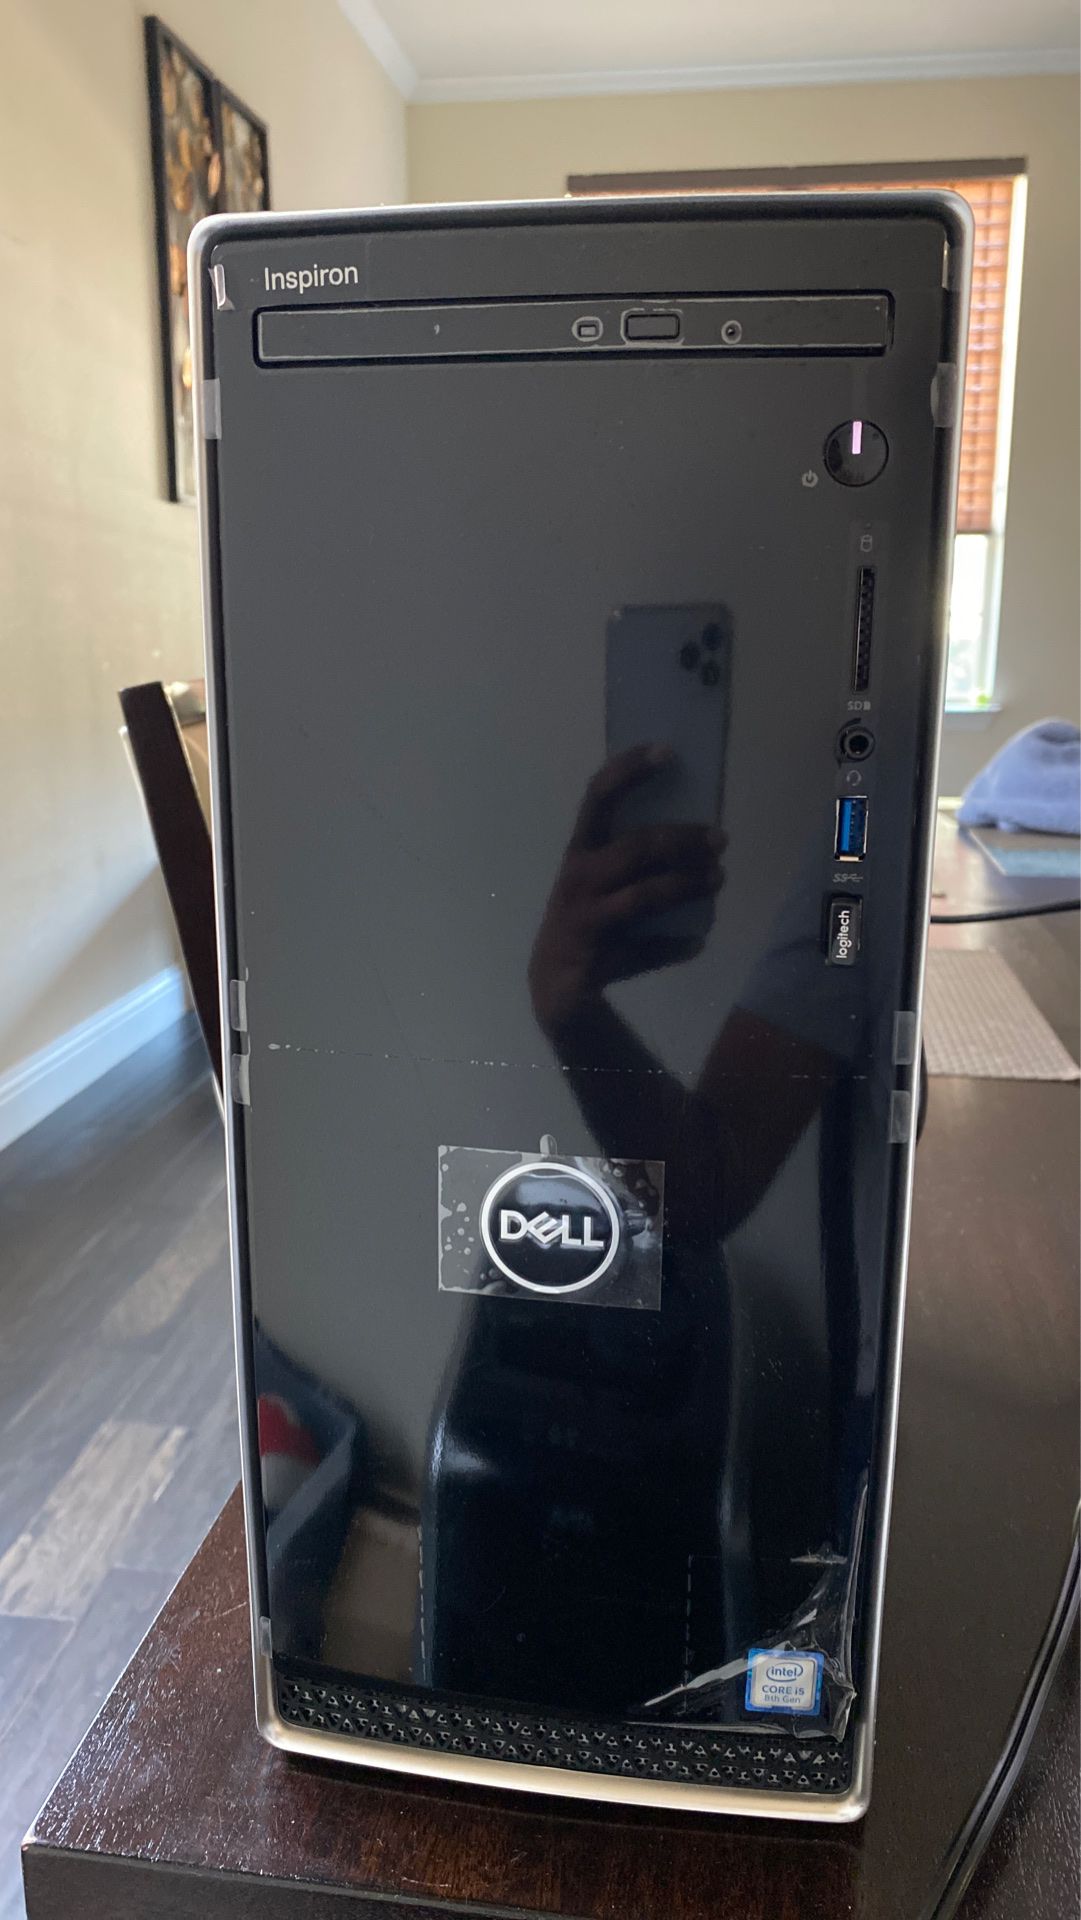 Dell Inspiron Desktop Computer with Wireless Keyboard and mouse